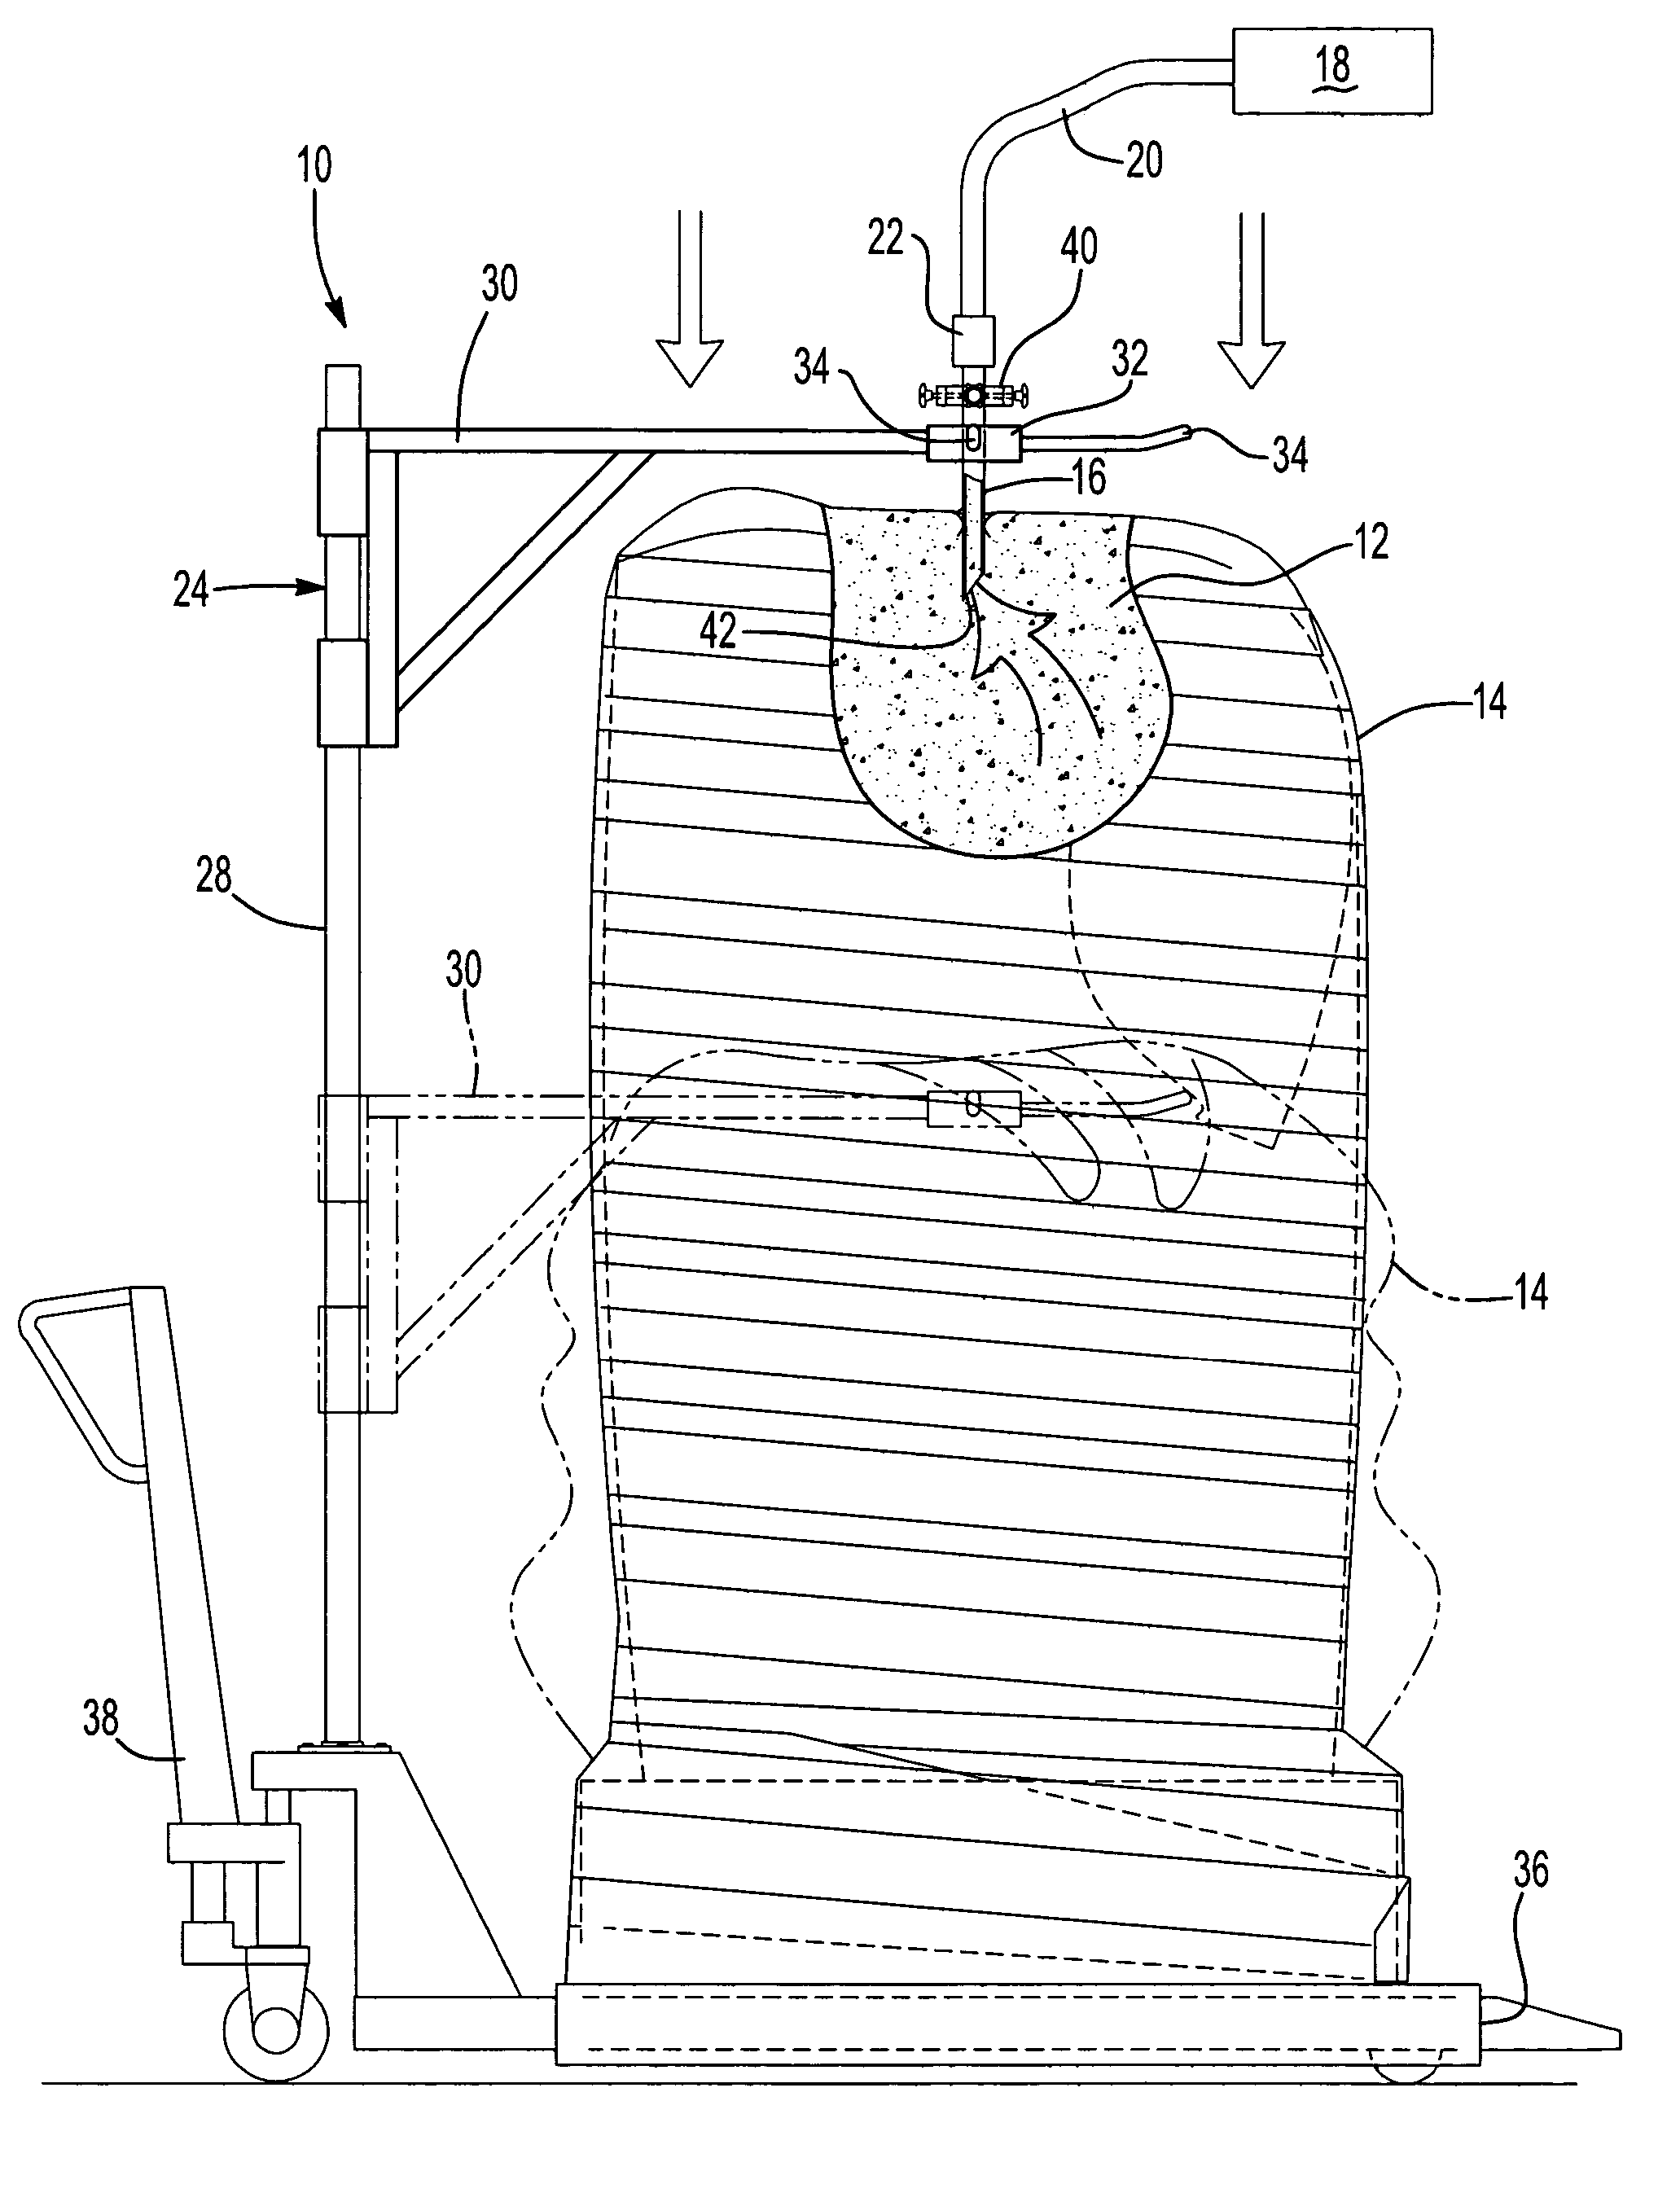 Vacuum wand assembly for extracting a product from a container